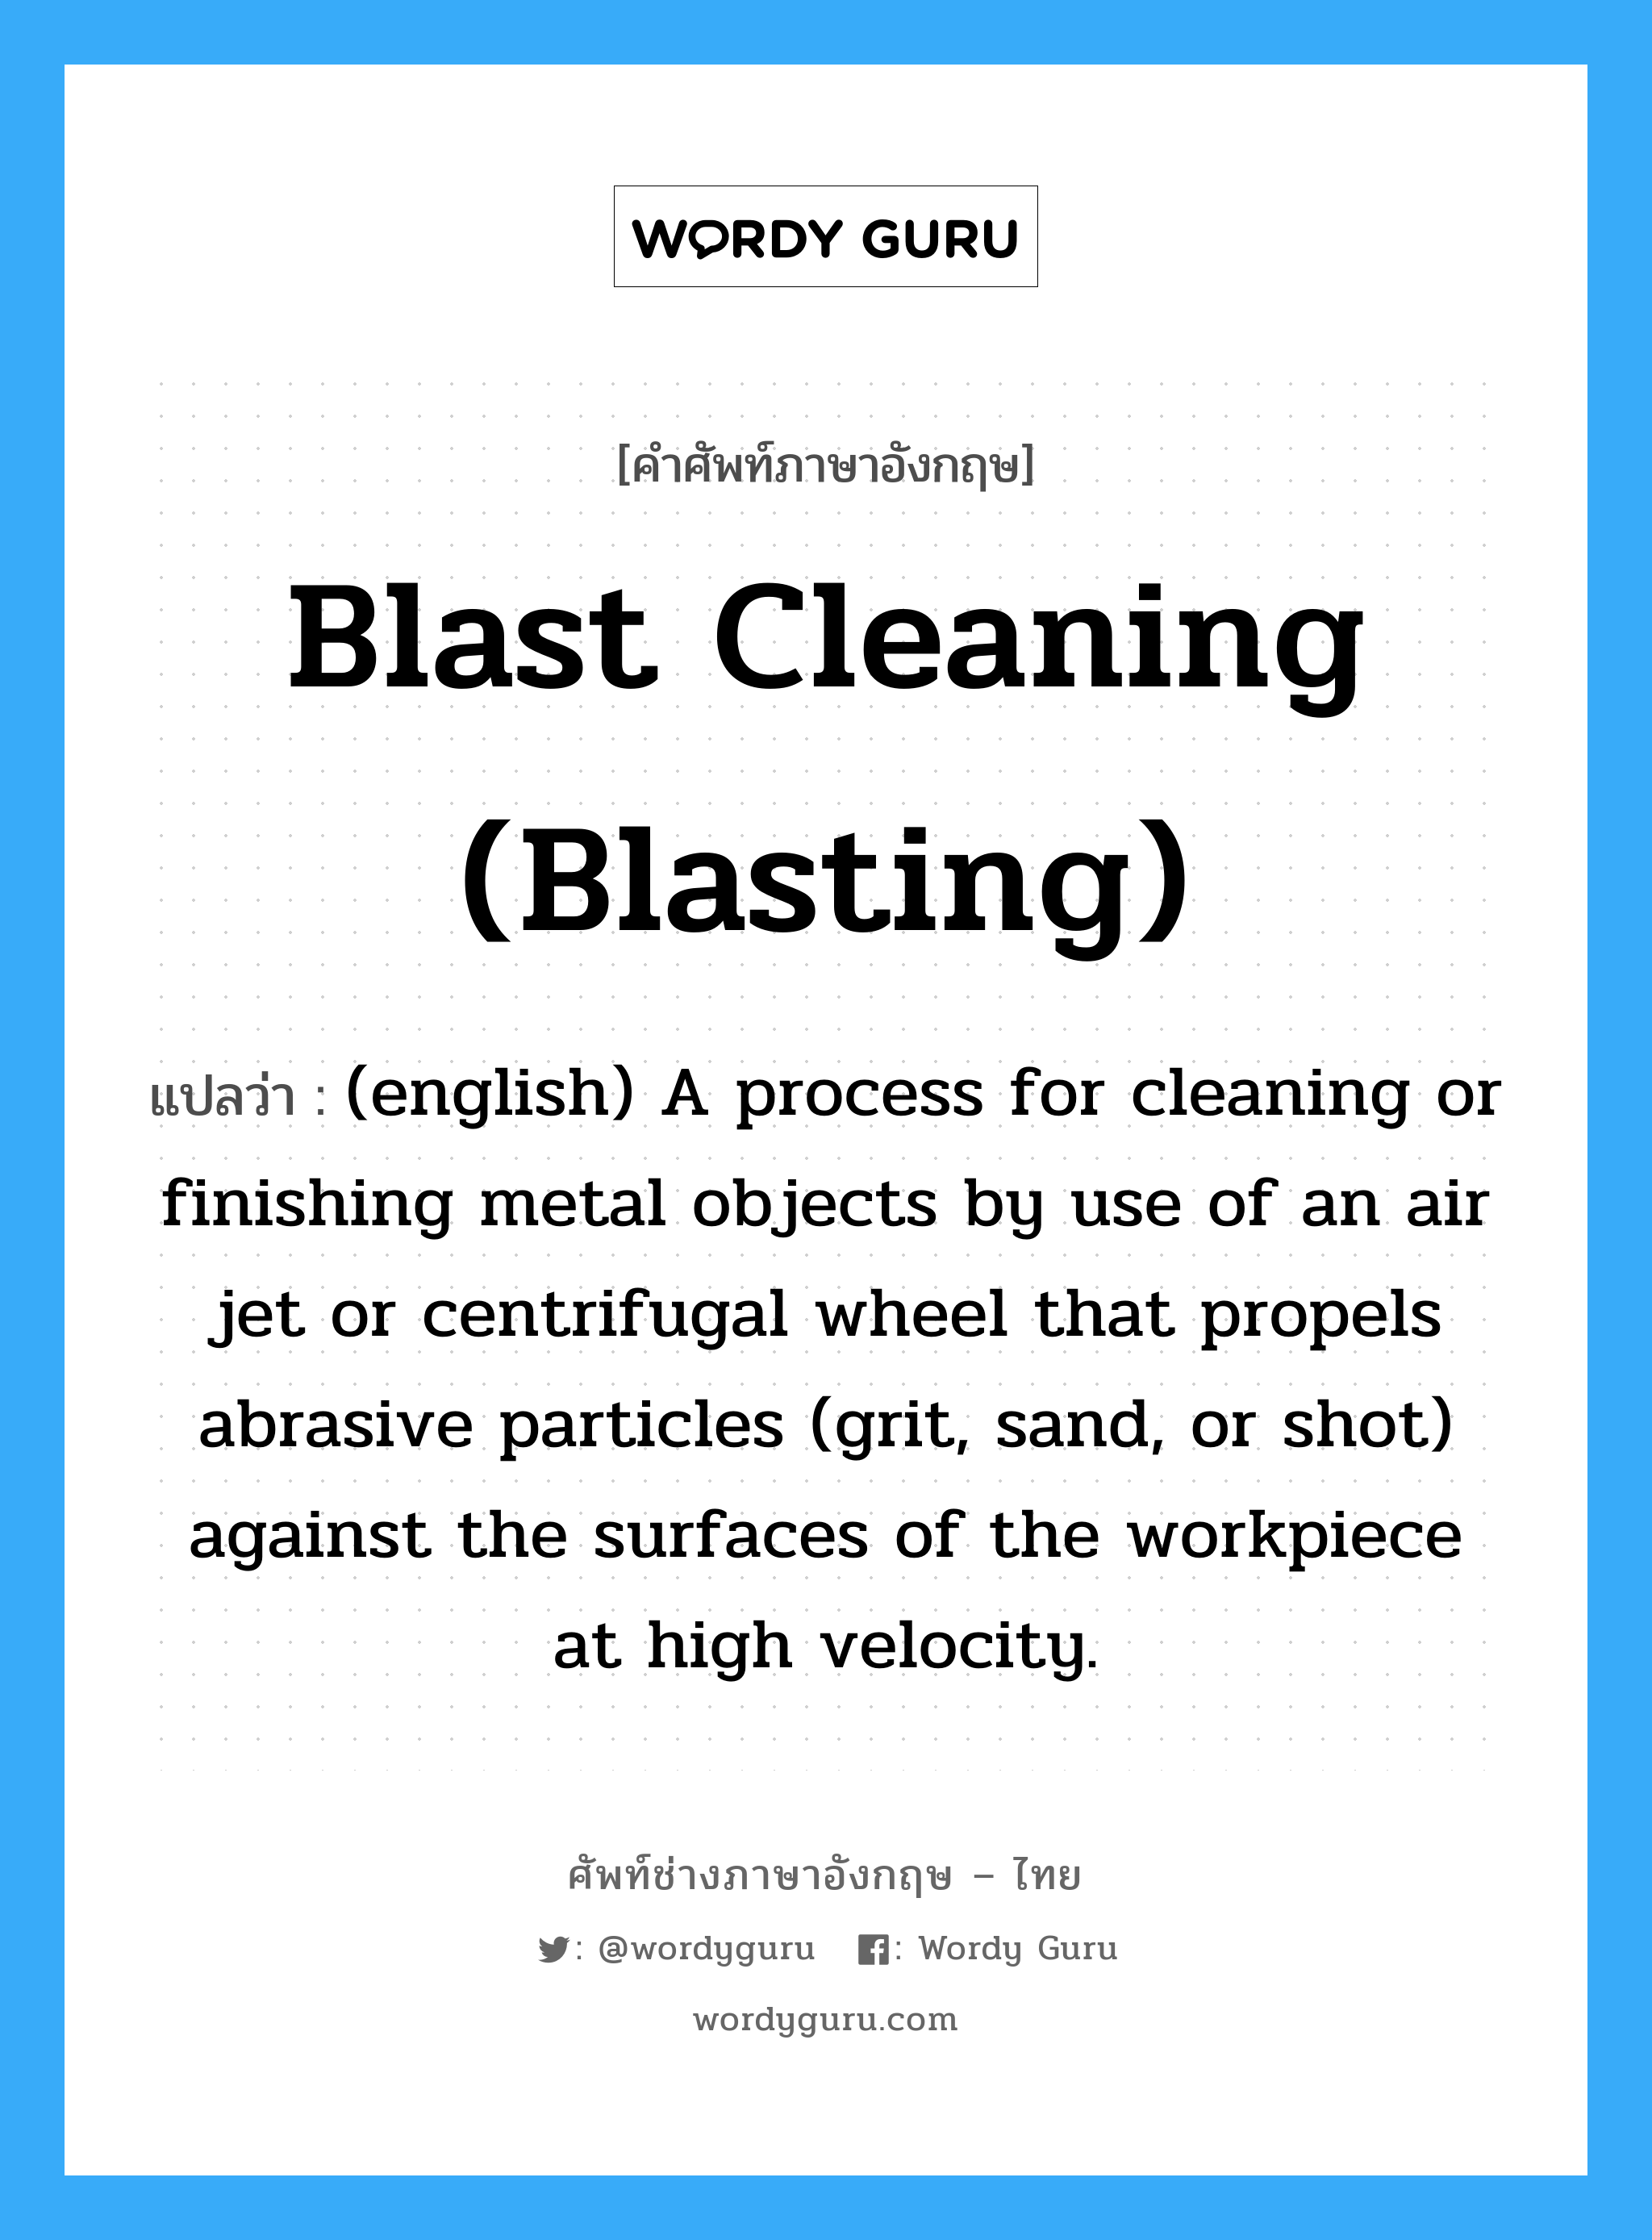 Blast Cleaning (blasting) แปลว่า?, คำศัพท์ช่างภาษาอังกฤษ - ไทย Blast Cleaning (blasting) คำศัพท์ภาษาอังกฤษ Blast Cleaning (blasting) แปลว่า (english) A process for cleaning or finishing metal objects by use of an air jet or centrifugal wheel that propels abrasive particles (grit, sand, or shot) against the surfaces of the workpiece at high velocity.